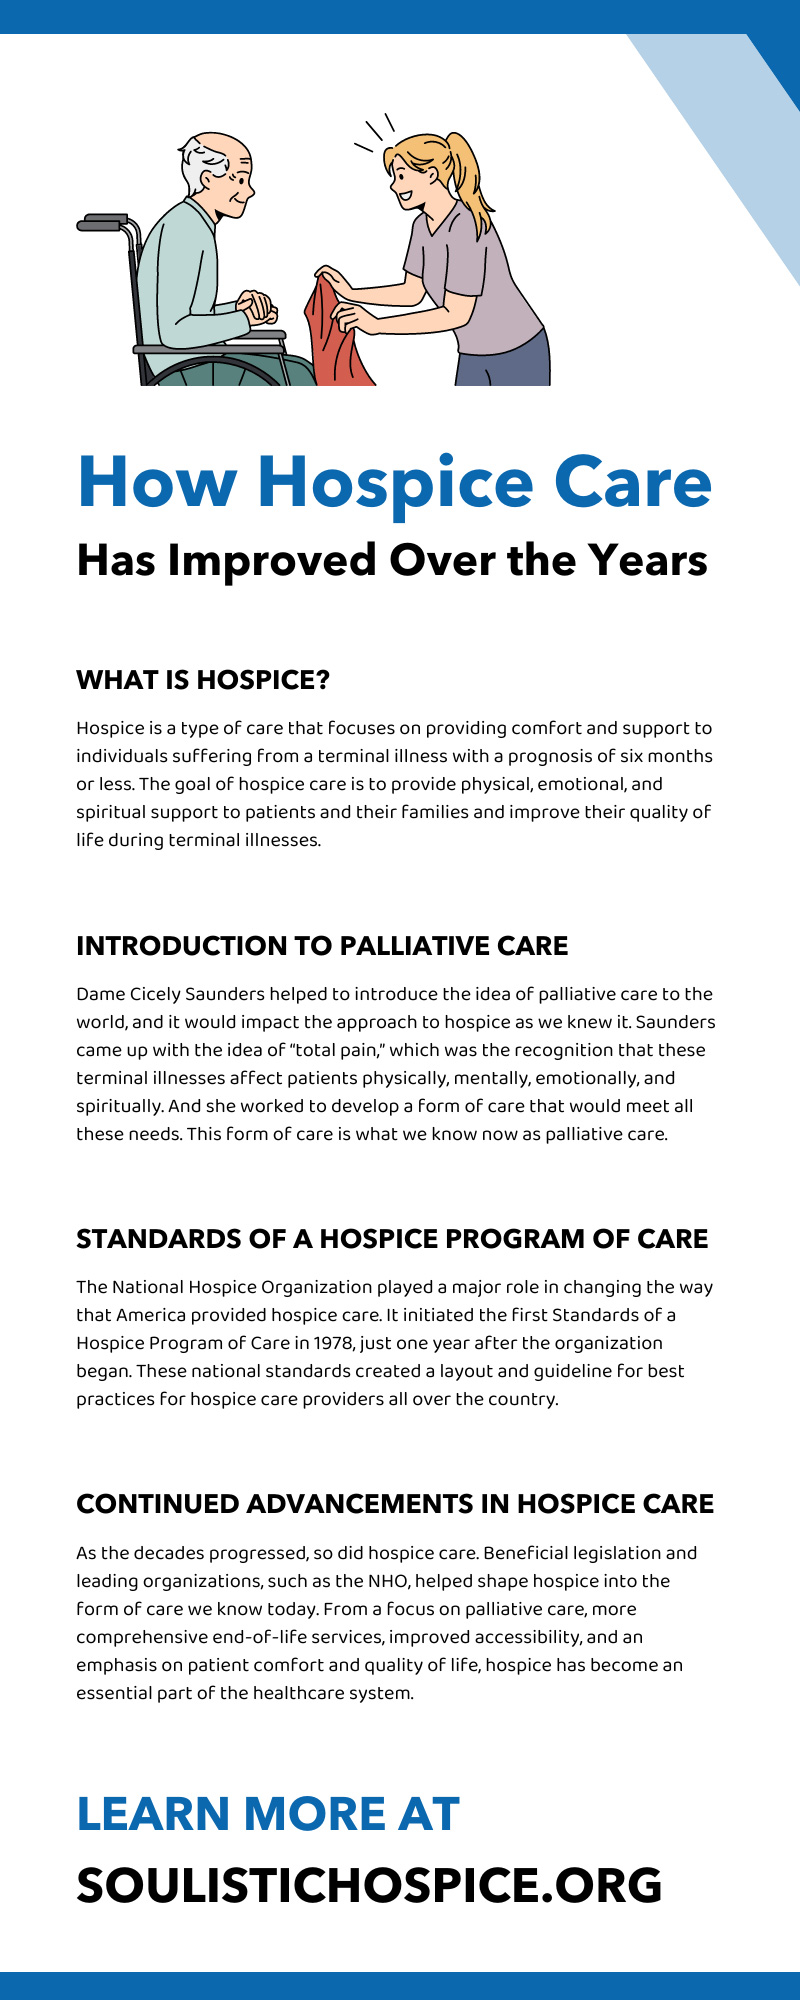 How Hospice Care Has Improved Over the Years